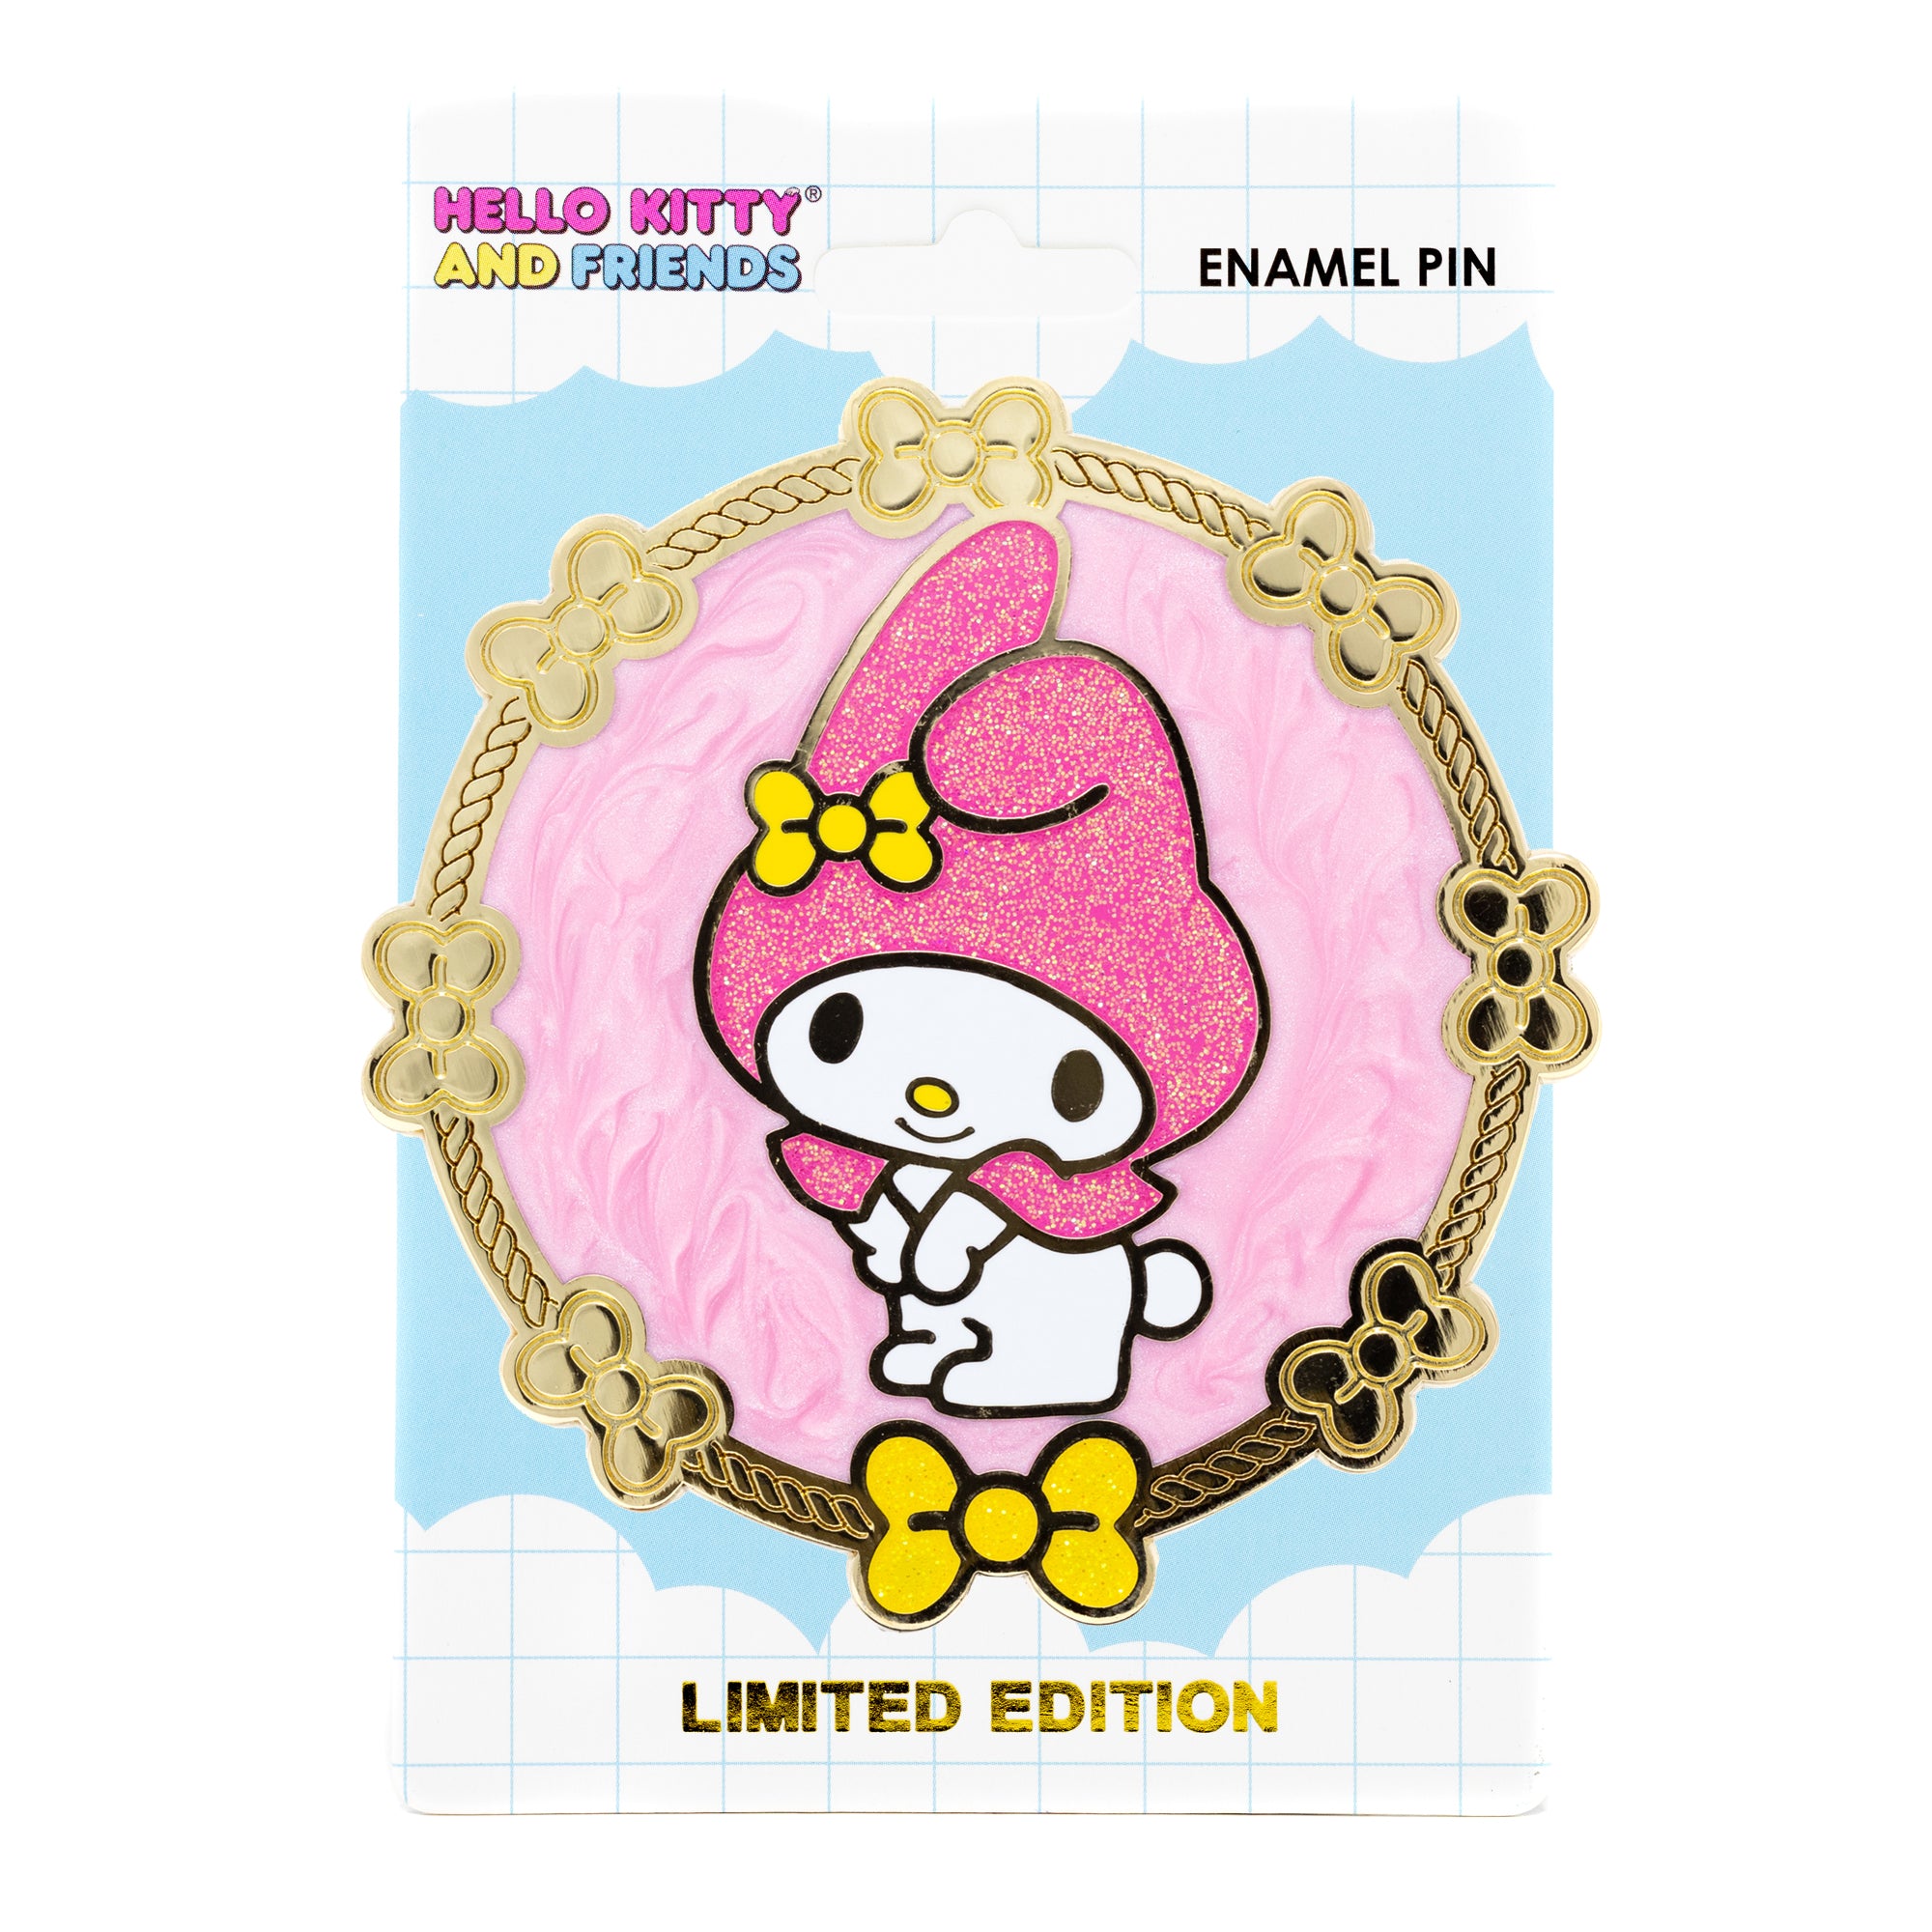 Sanrio Iconic Series - My Melody 3" Limited Edition 300 Pin - FINALSALE